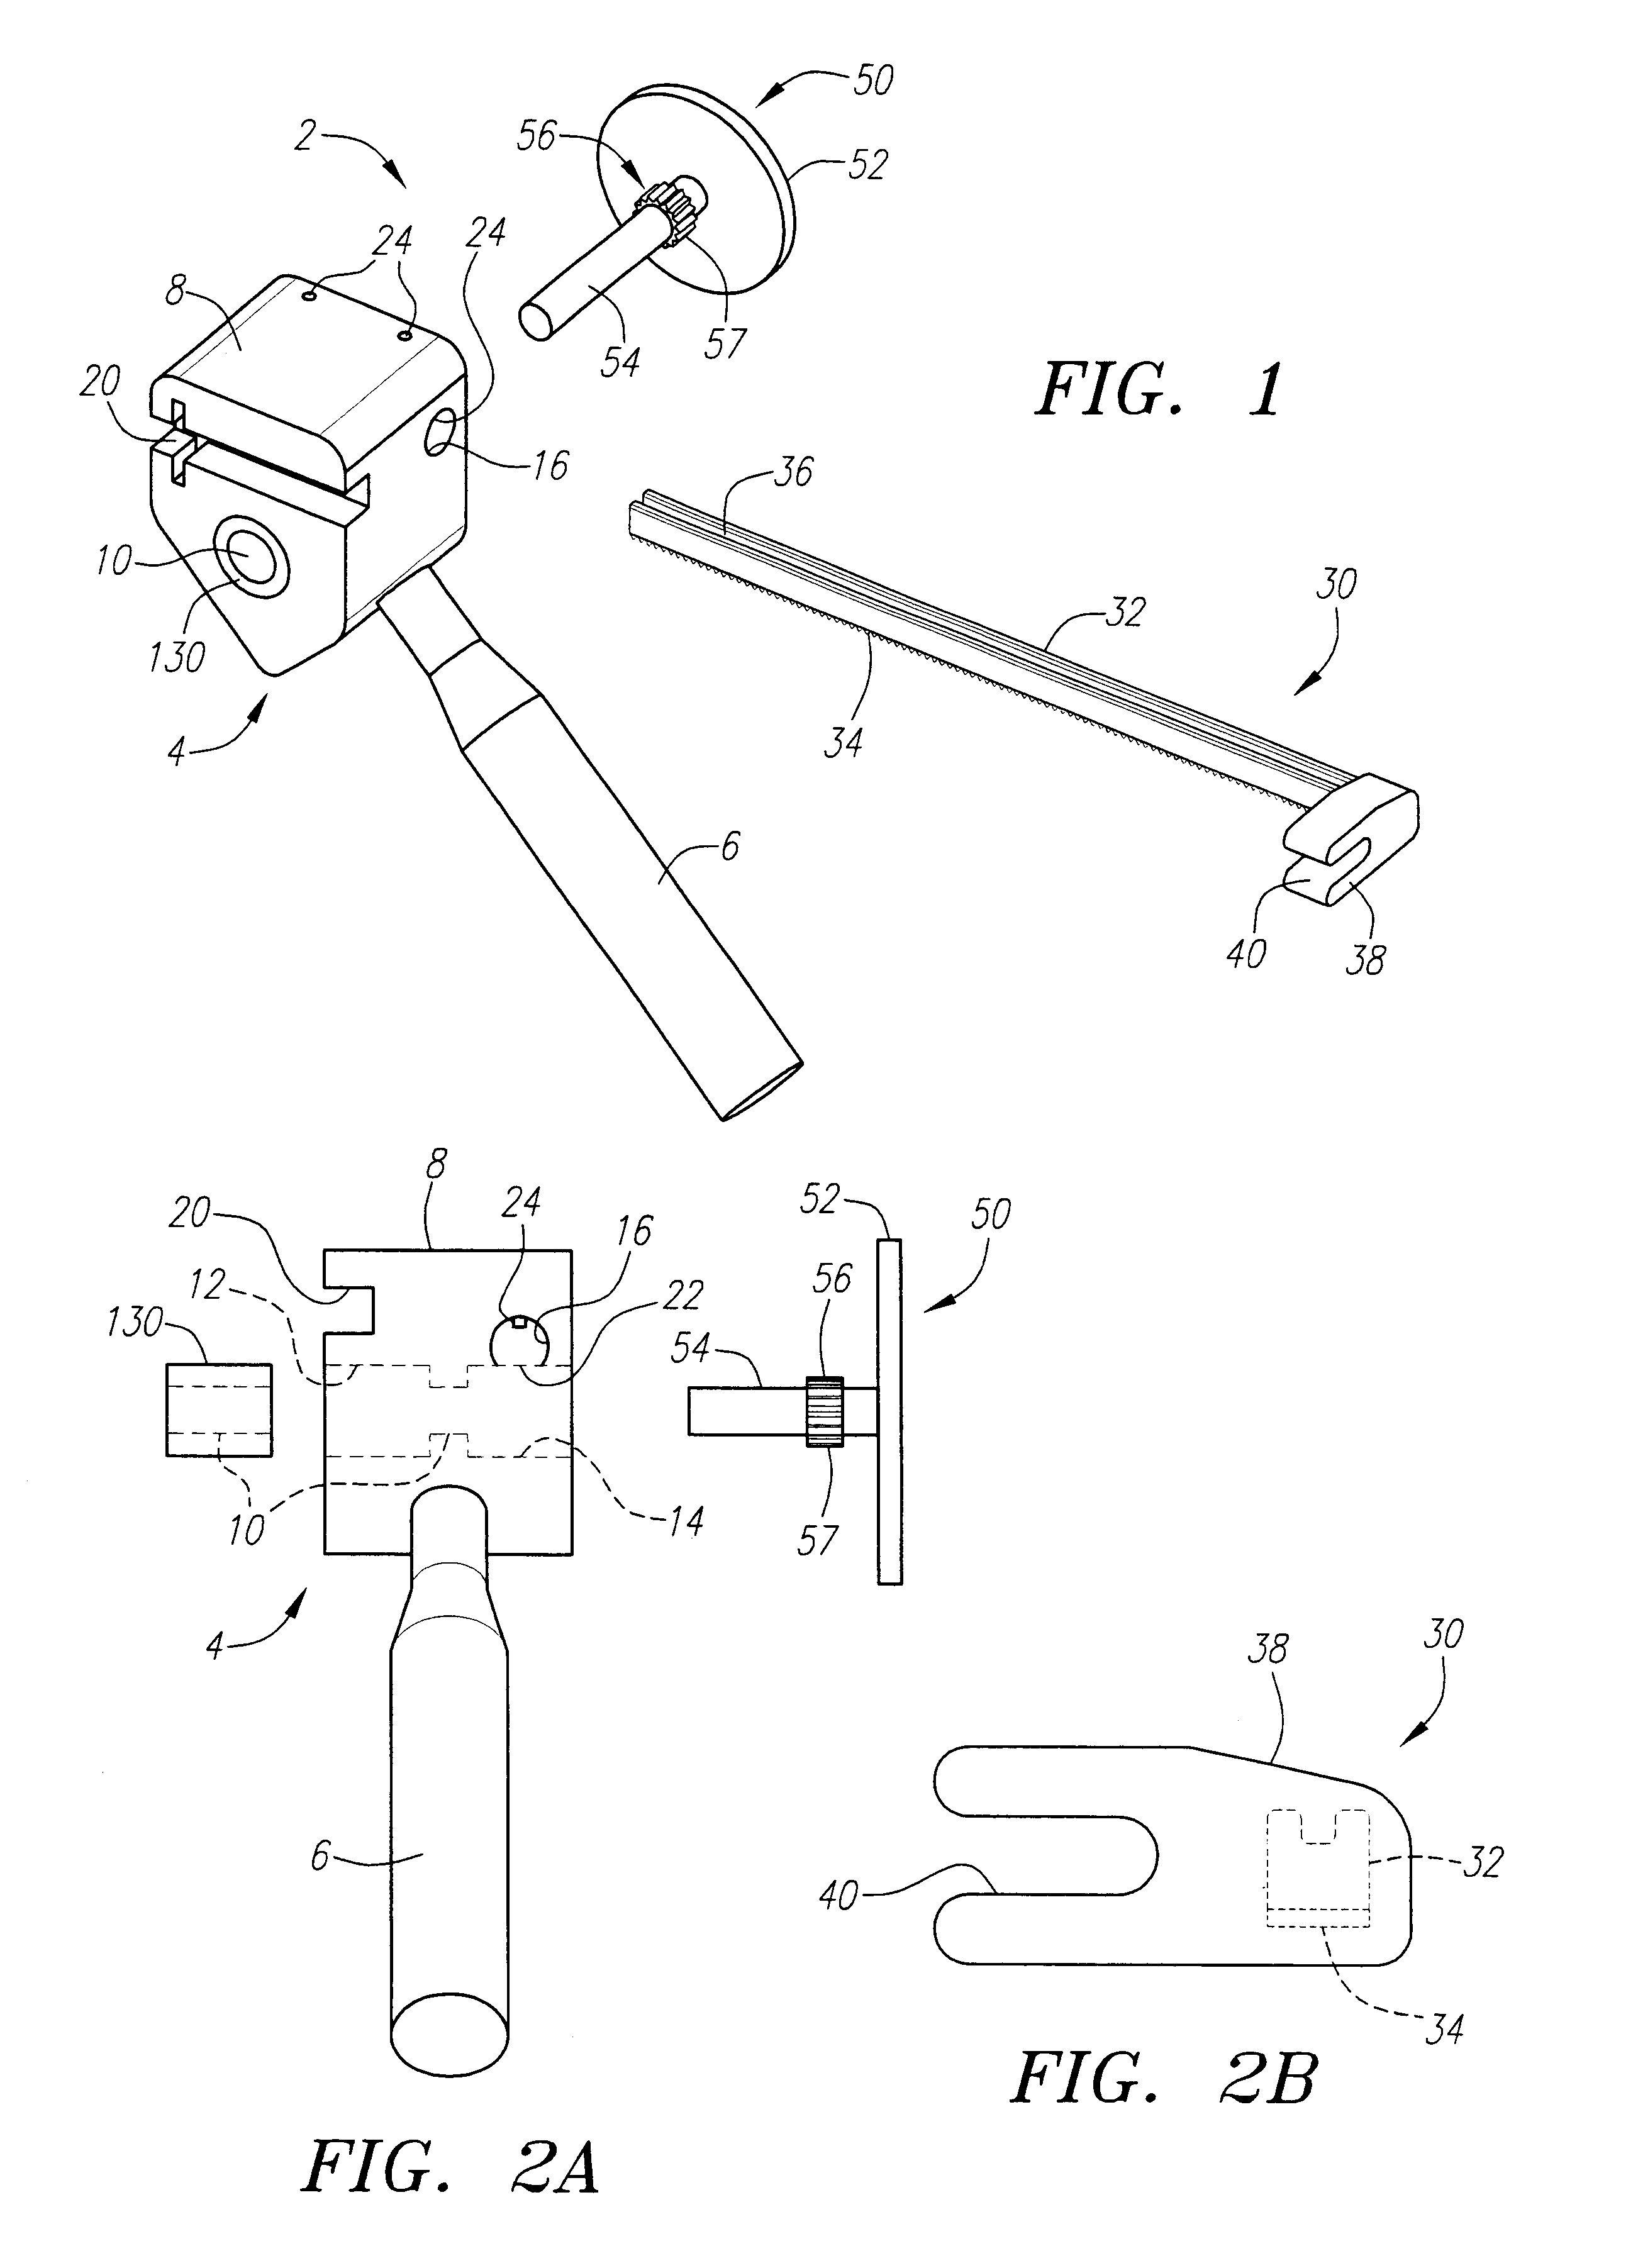 Stent delivery device